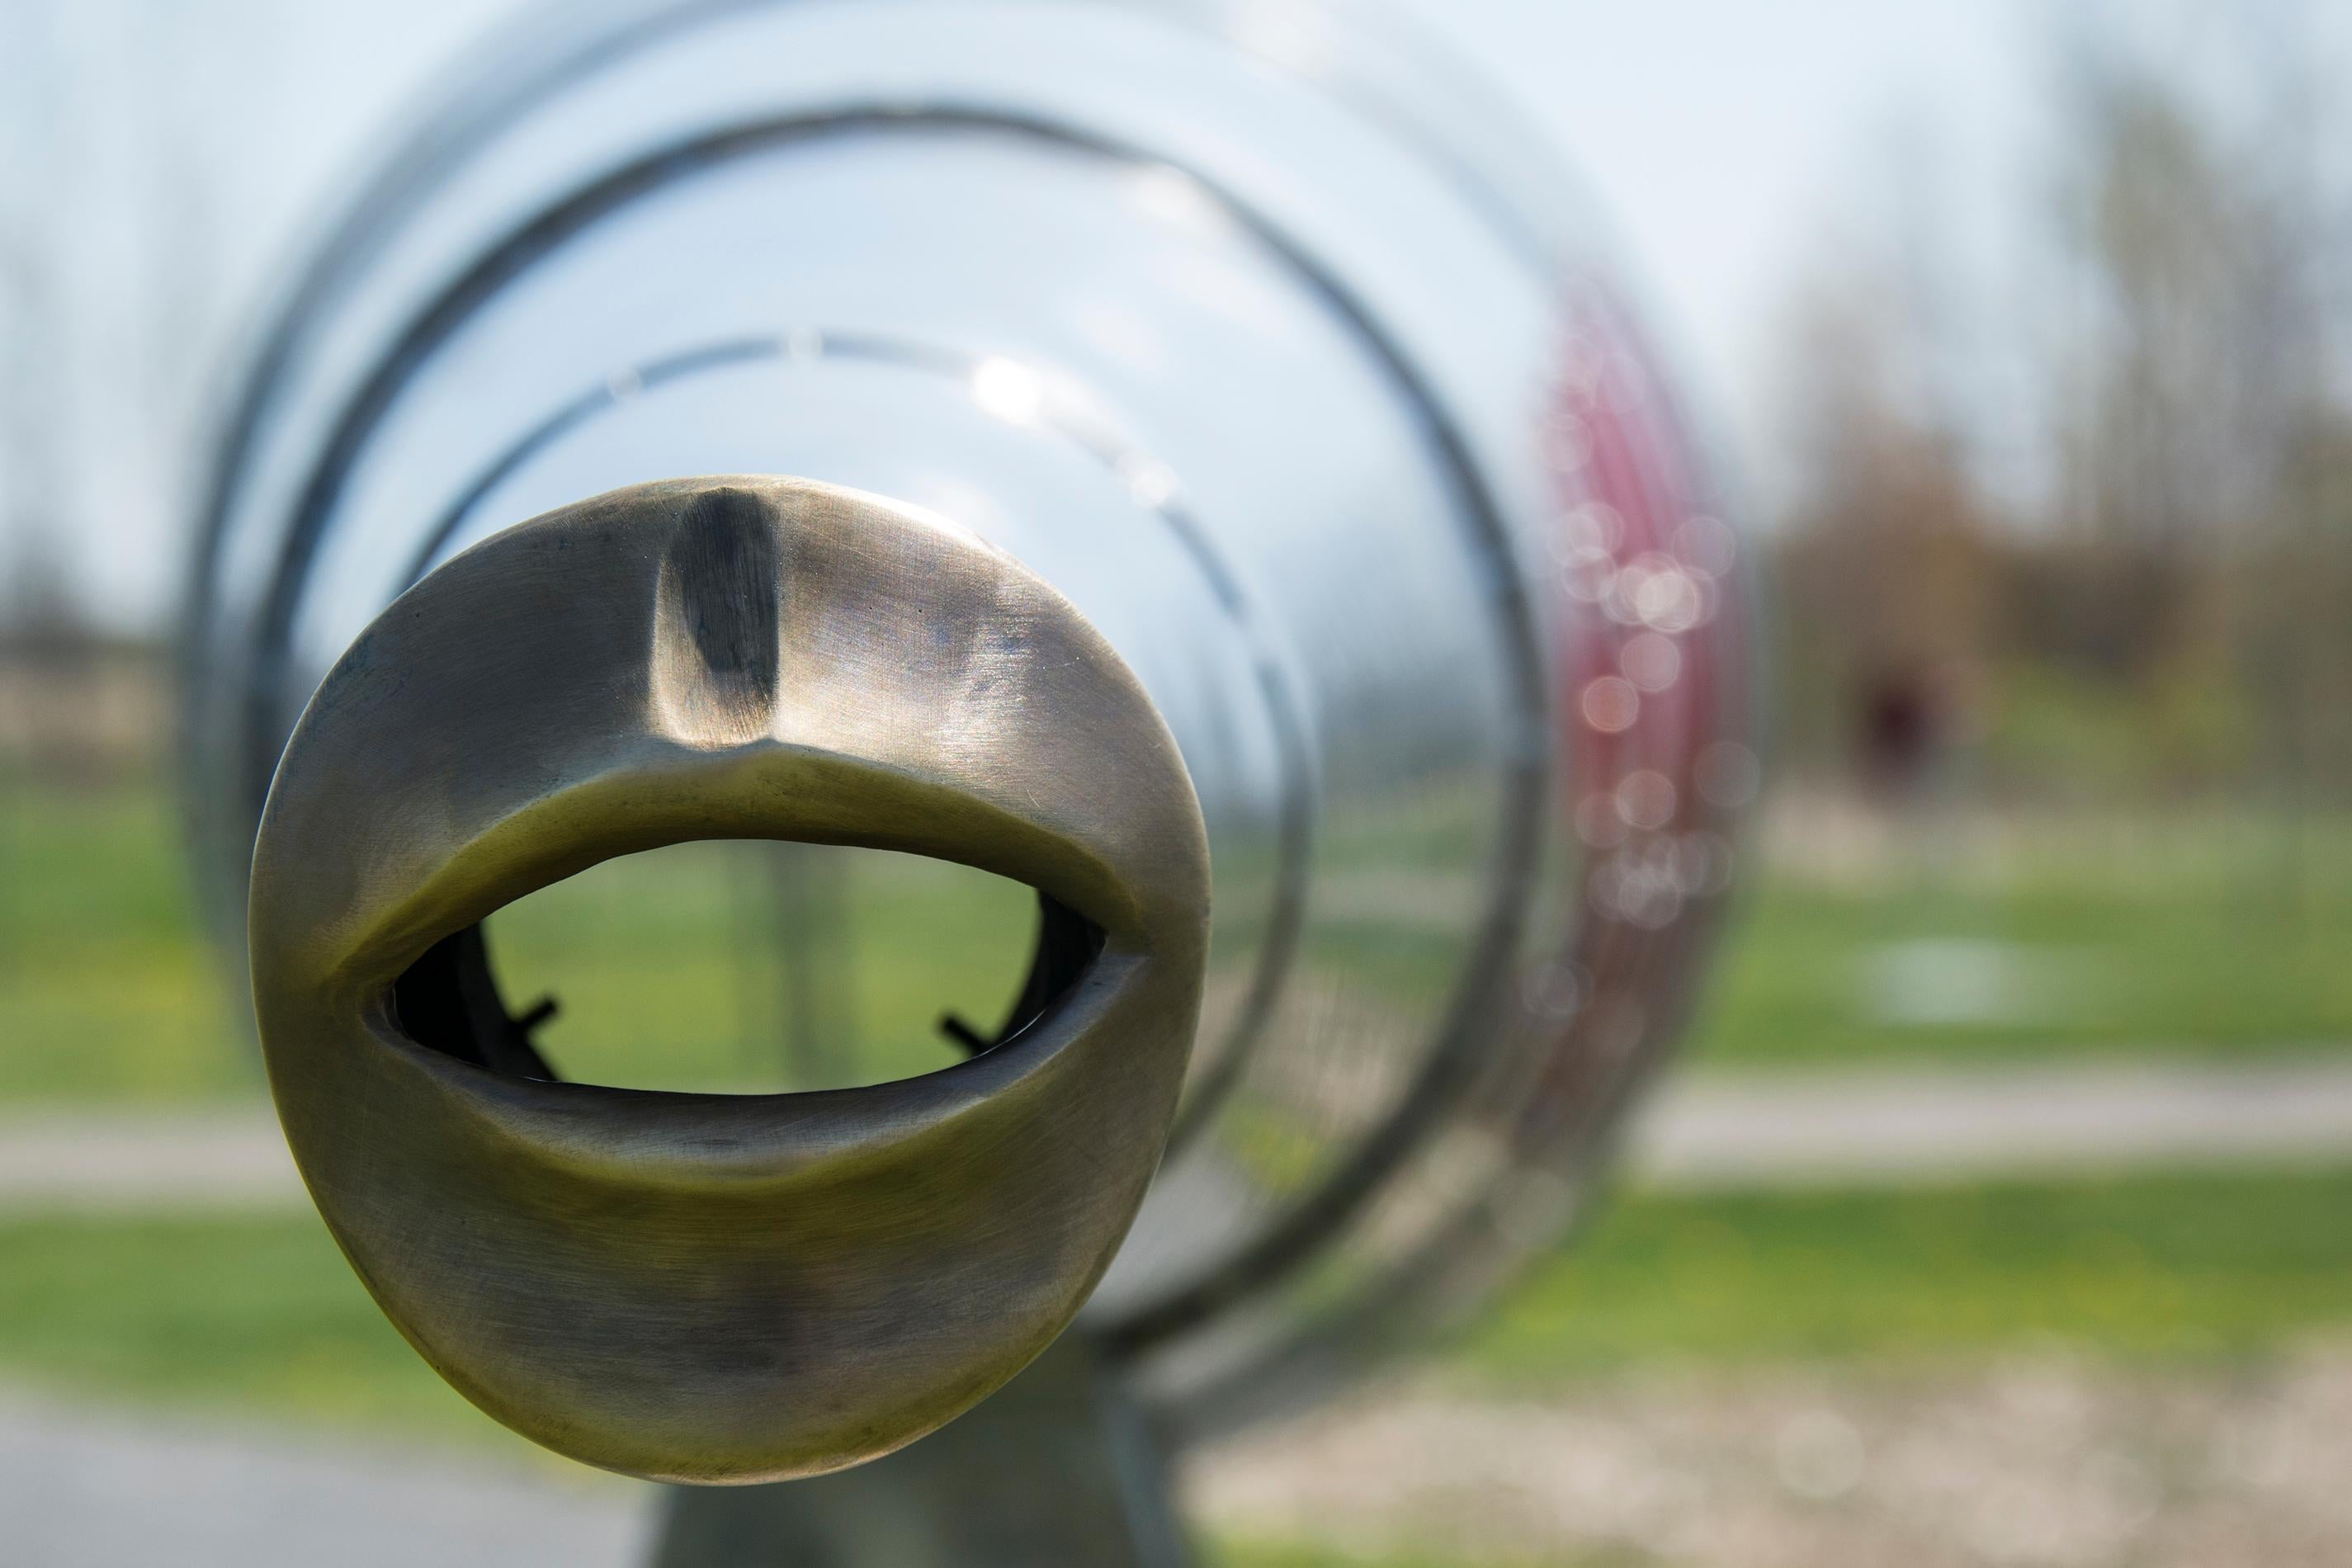 Shout is an outdoor steel sculpture and the companion piece to Hear The World: speak or shout into the sculpture and hear your voice carried across the garden. The mouthpiece is made of brass, a hygienic material which prevents the growth of